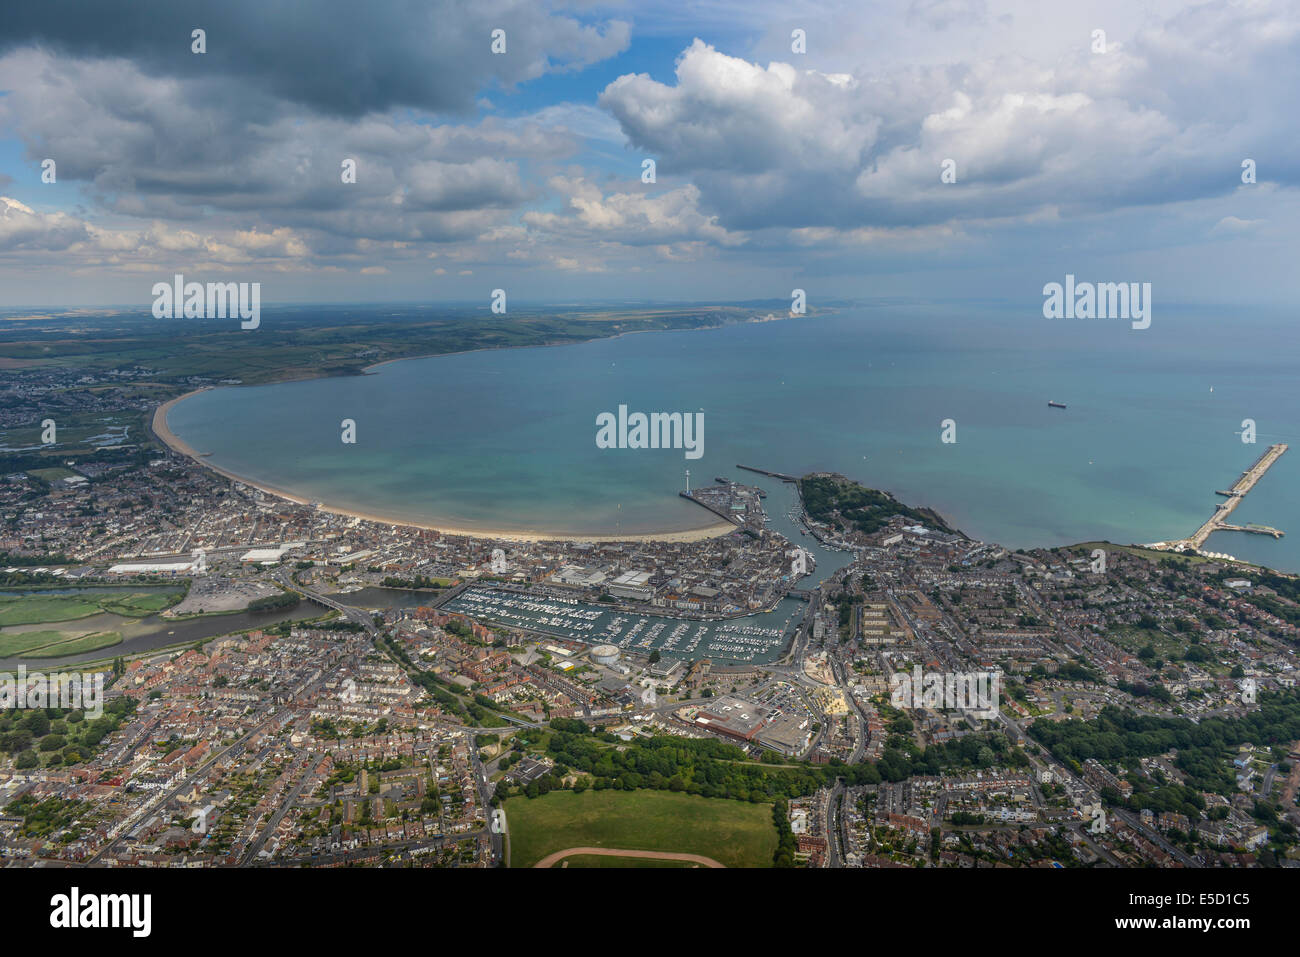 A wide aerial view of the Dorset town of Weymouth with the nearby coastline and countryside visible amd a dramatic sky. Stock Photo